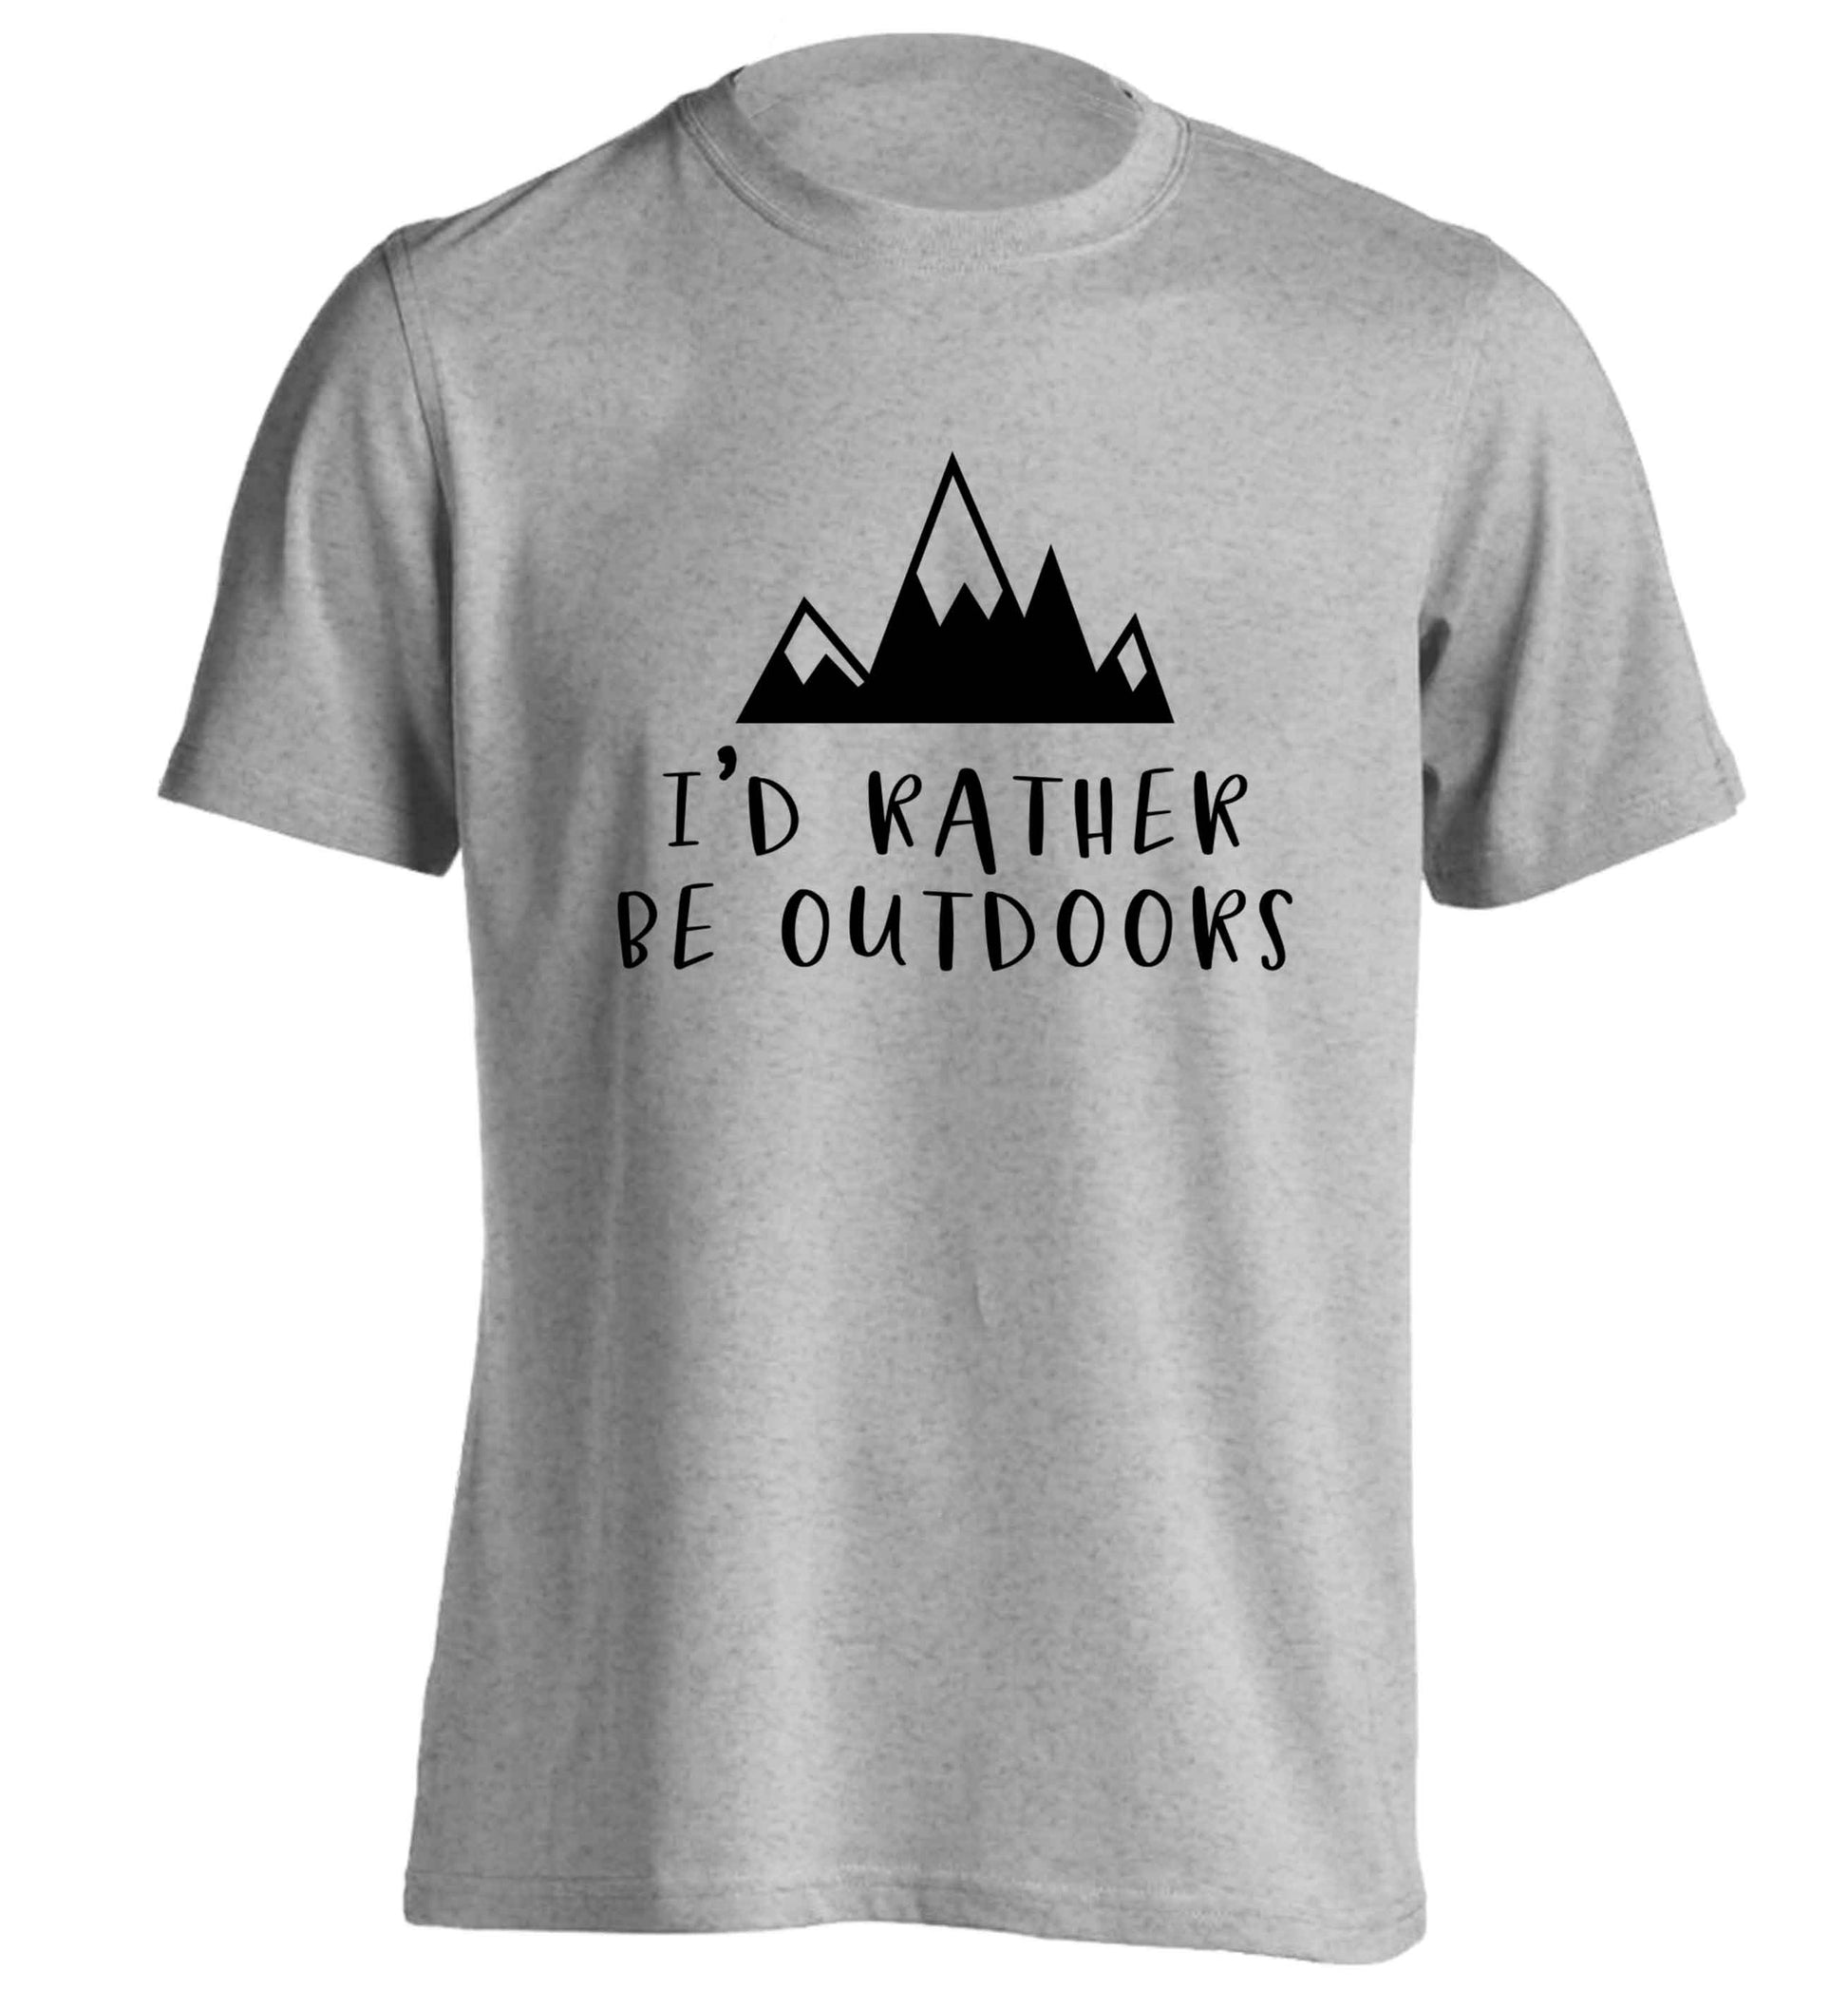 I'd rather be outdoors adults unisex grey Tshirt 2XL